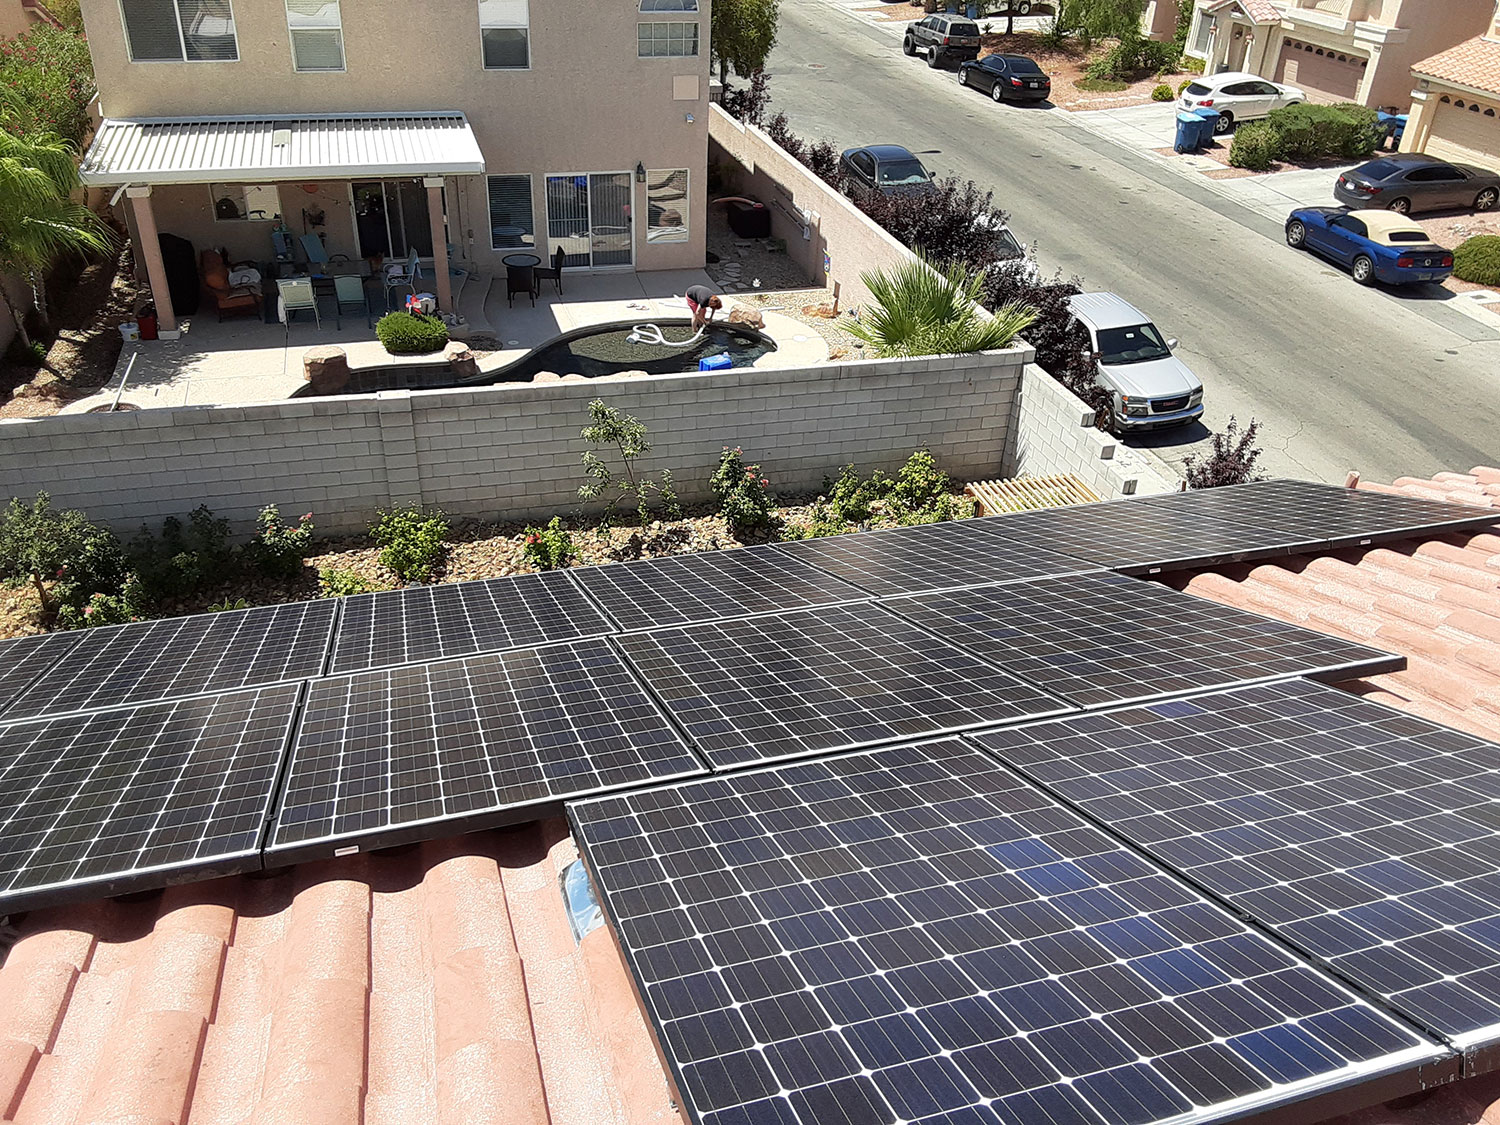 Solar services, Black Mountain, Southern Nevada, renewable energy, solar installation, climate, energy solutions, sunlight, sustainable living, eco-friendly